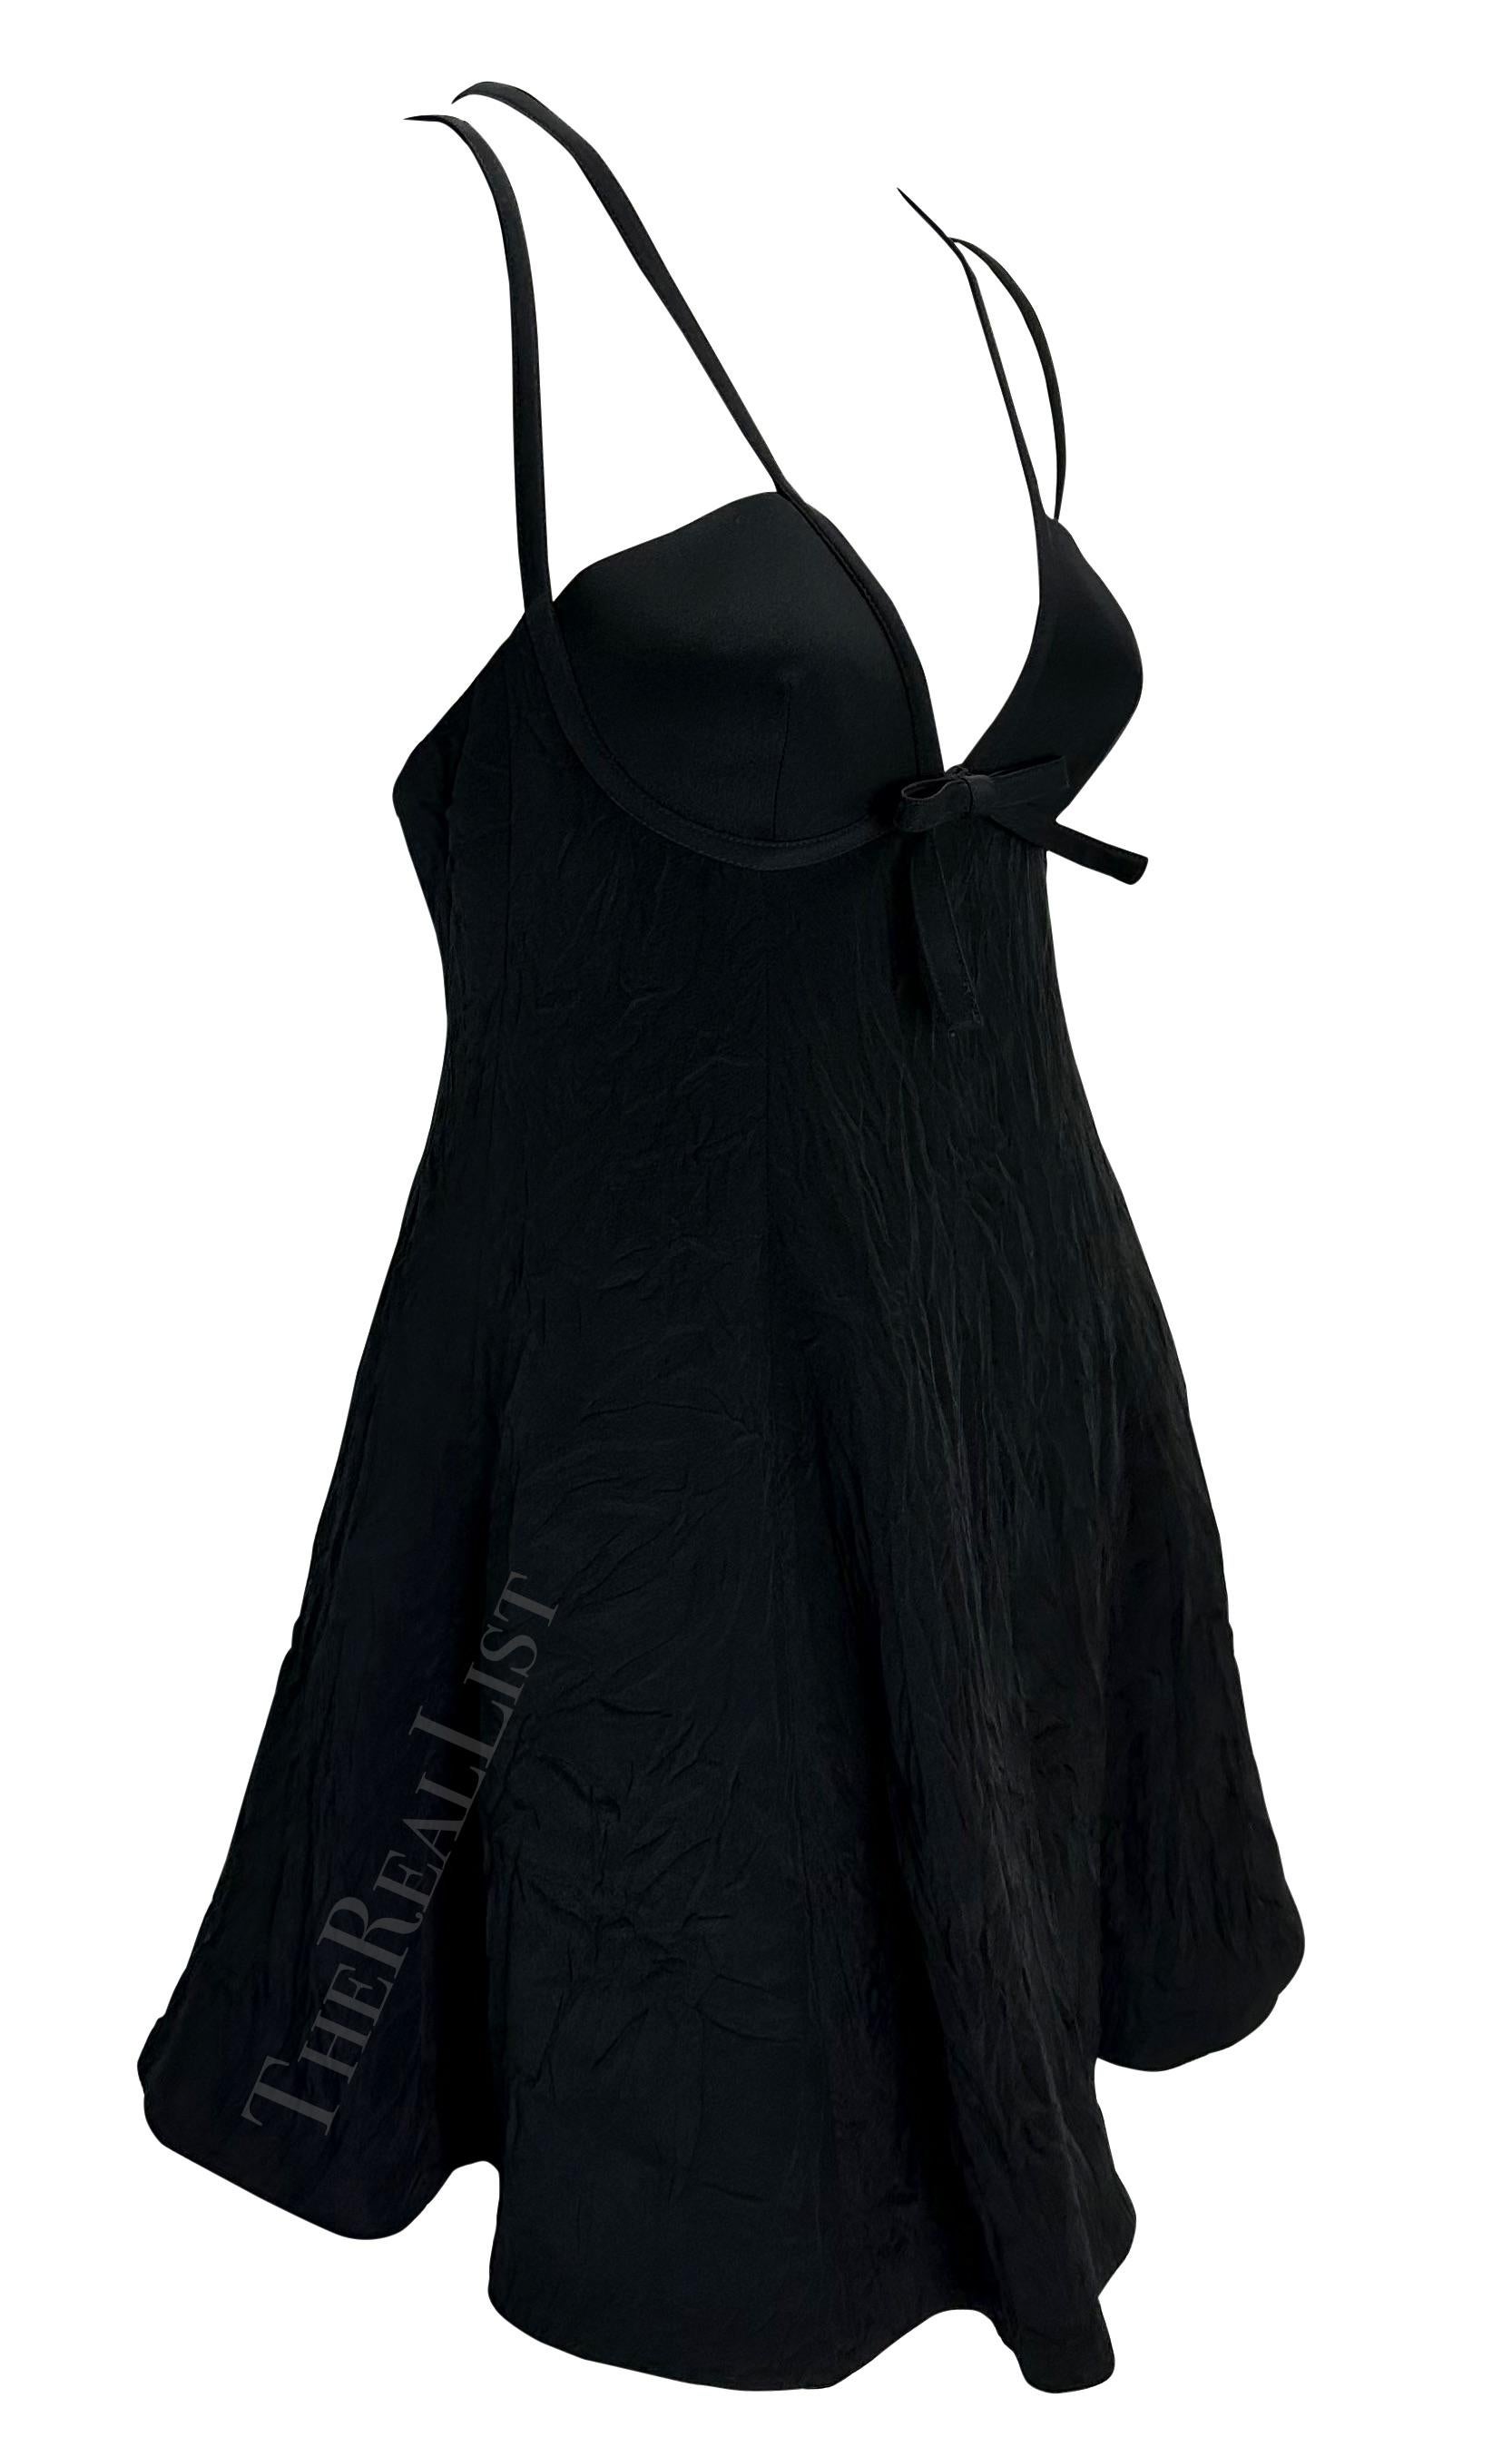 S/S 1994 Gianni Versace Black Wrinkled Punk Flare Mini Baby Doll Dress For Sale 3